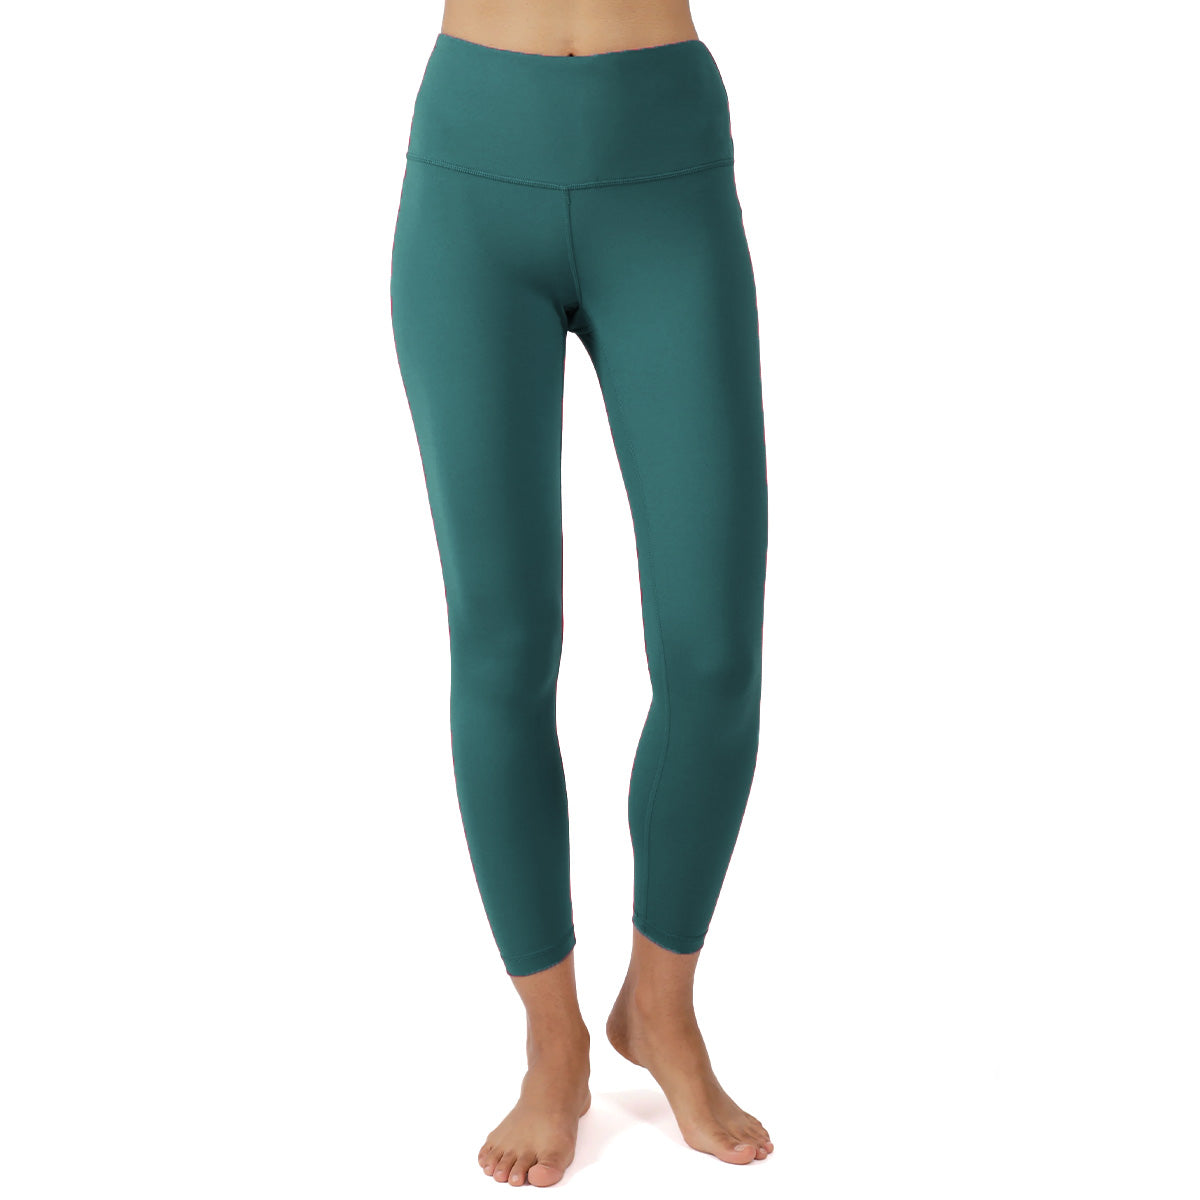 Image of Yogalicious by Reflex Women's Lux High Rise Basic Ankle Legging